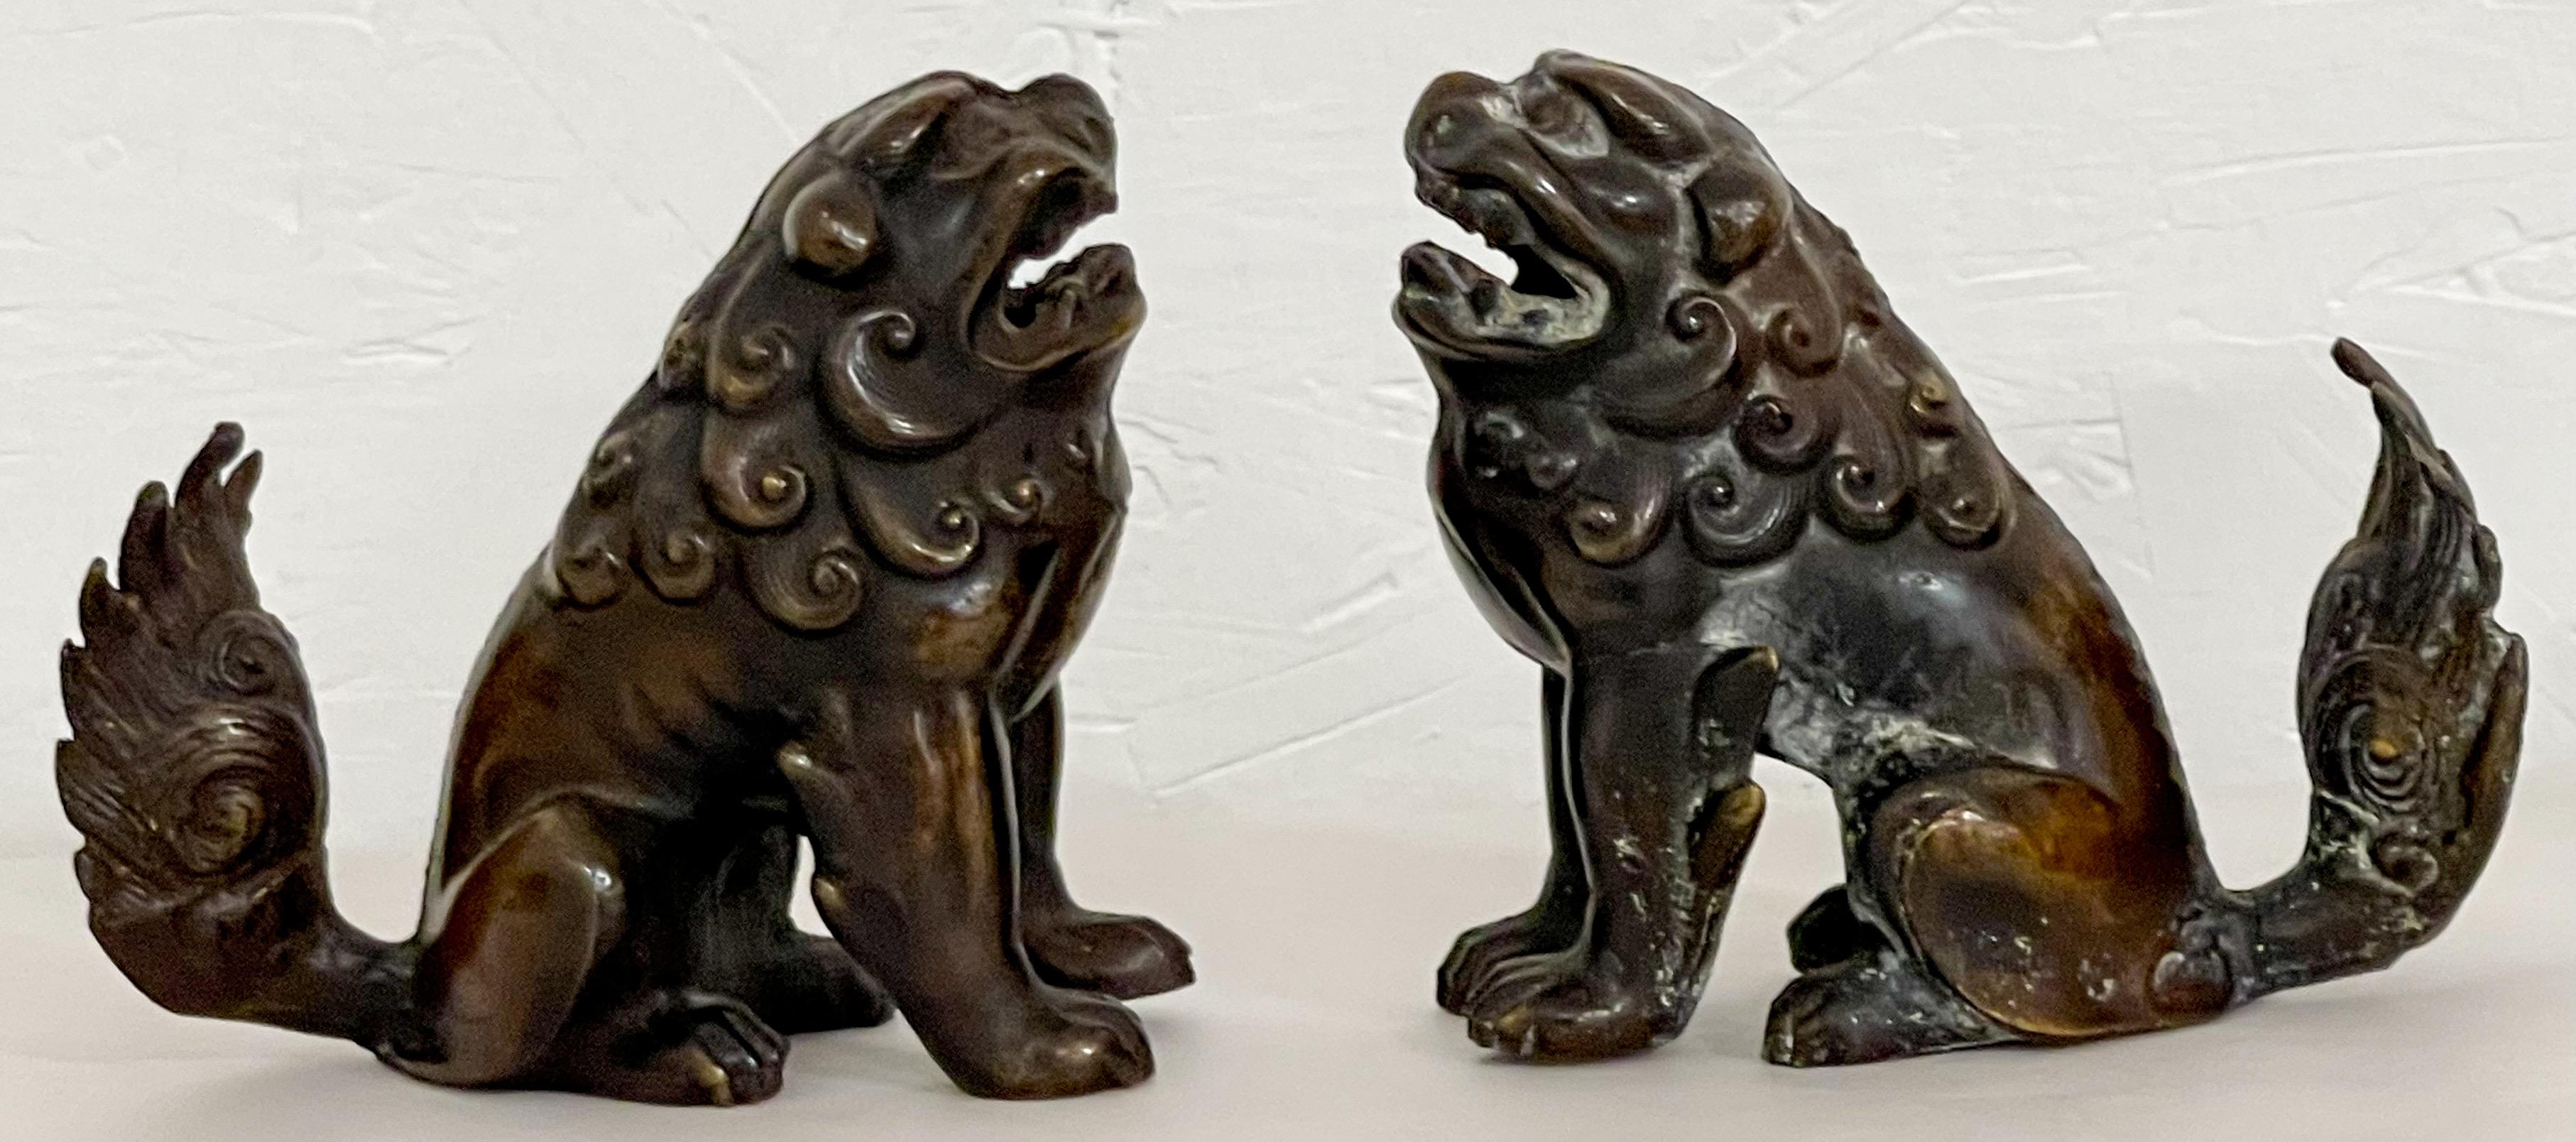 Chinese Export Early 20th-C. Asian Bronze Food Dogs or Lions Figurines, Pair For Sale